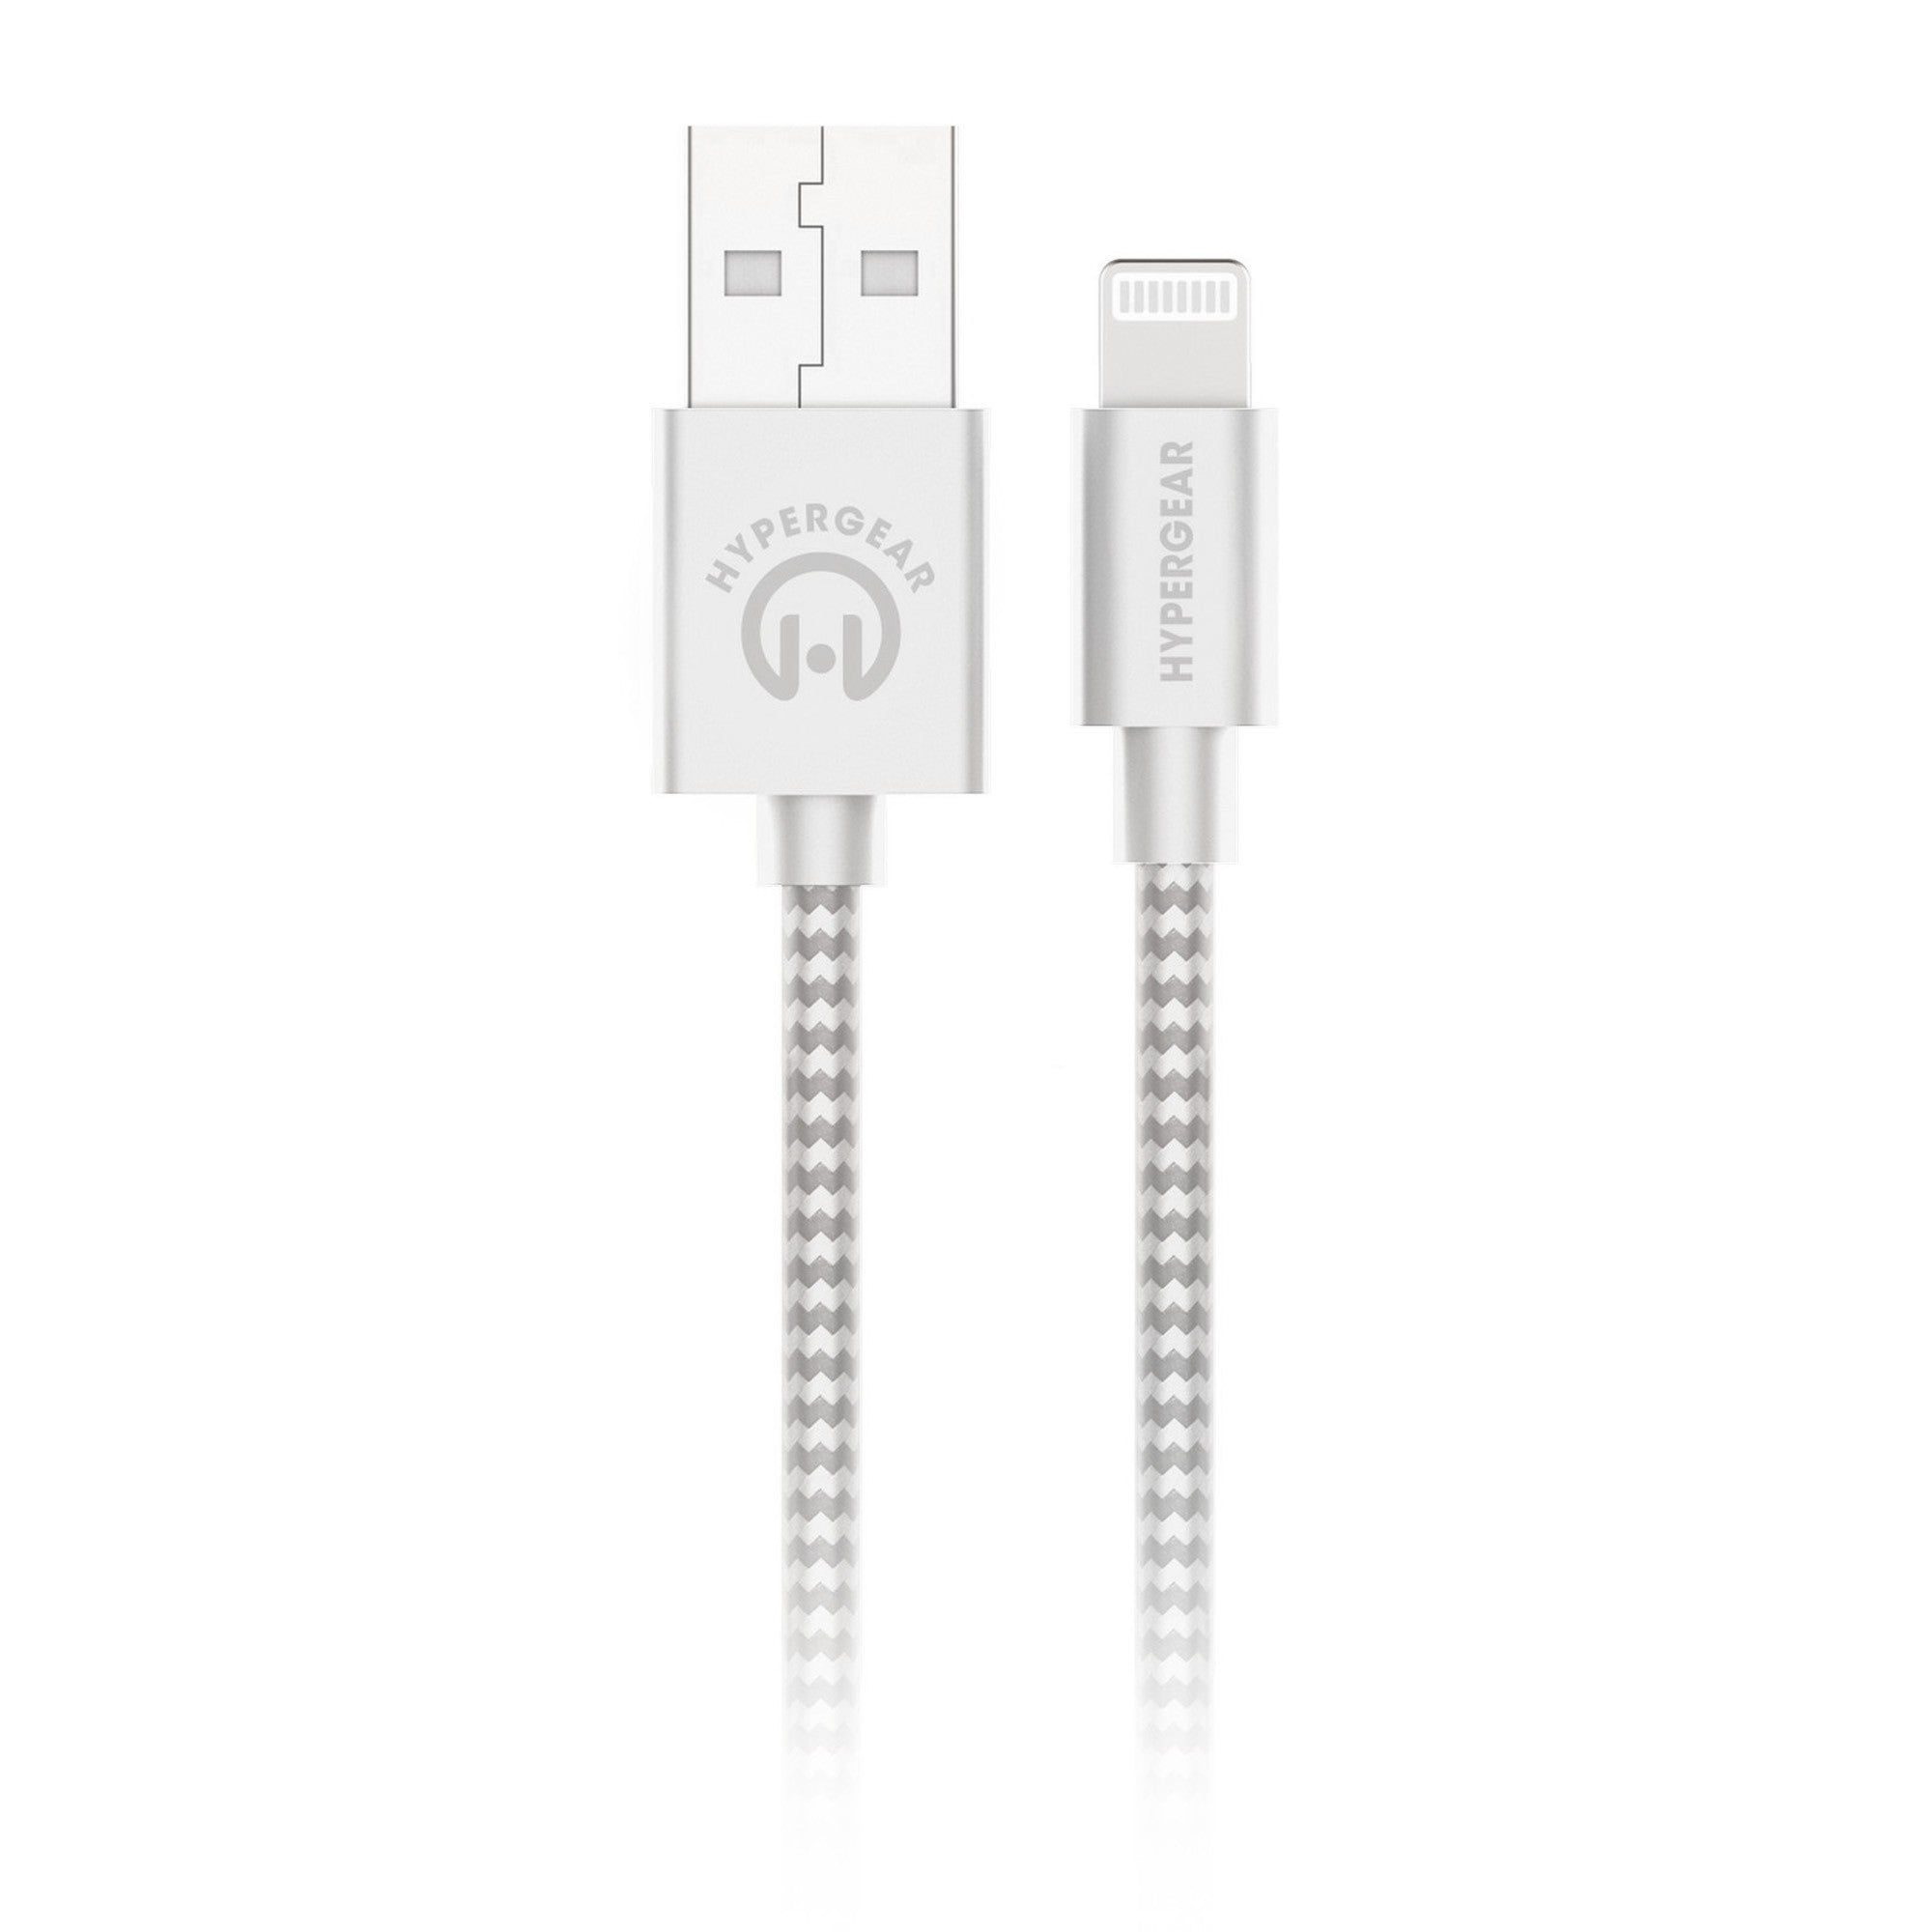 HyperGear 10 ft. (300cm) USB-A to Lightning Braided Charge and Sync Cable - White - 15-12113